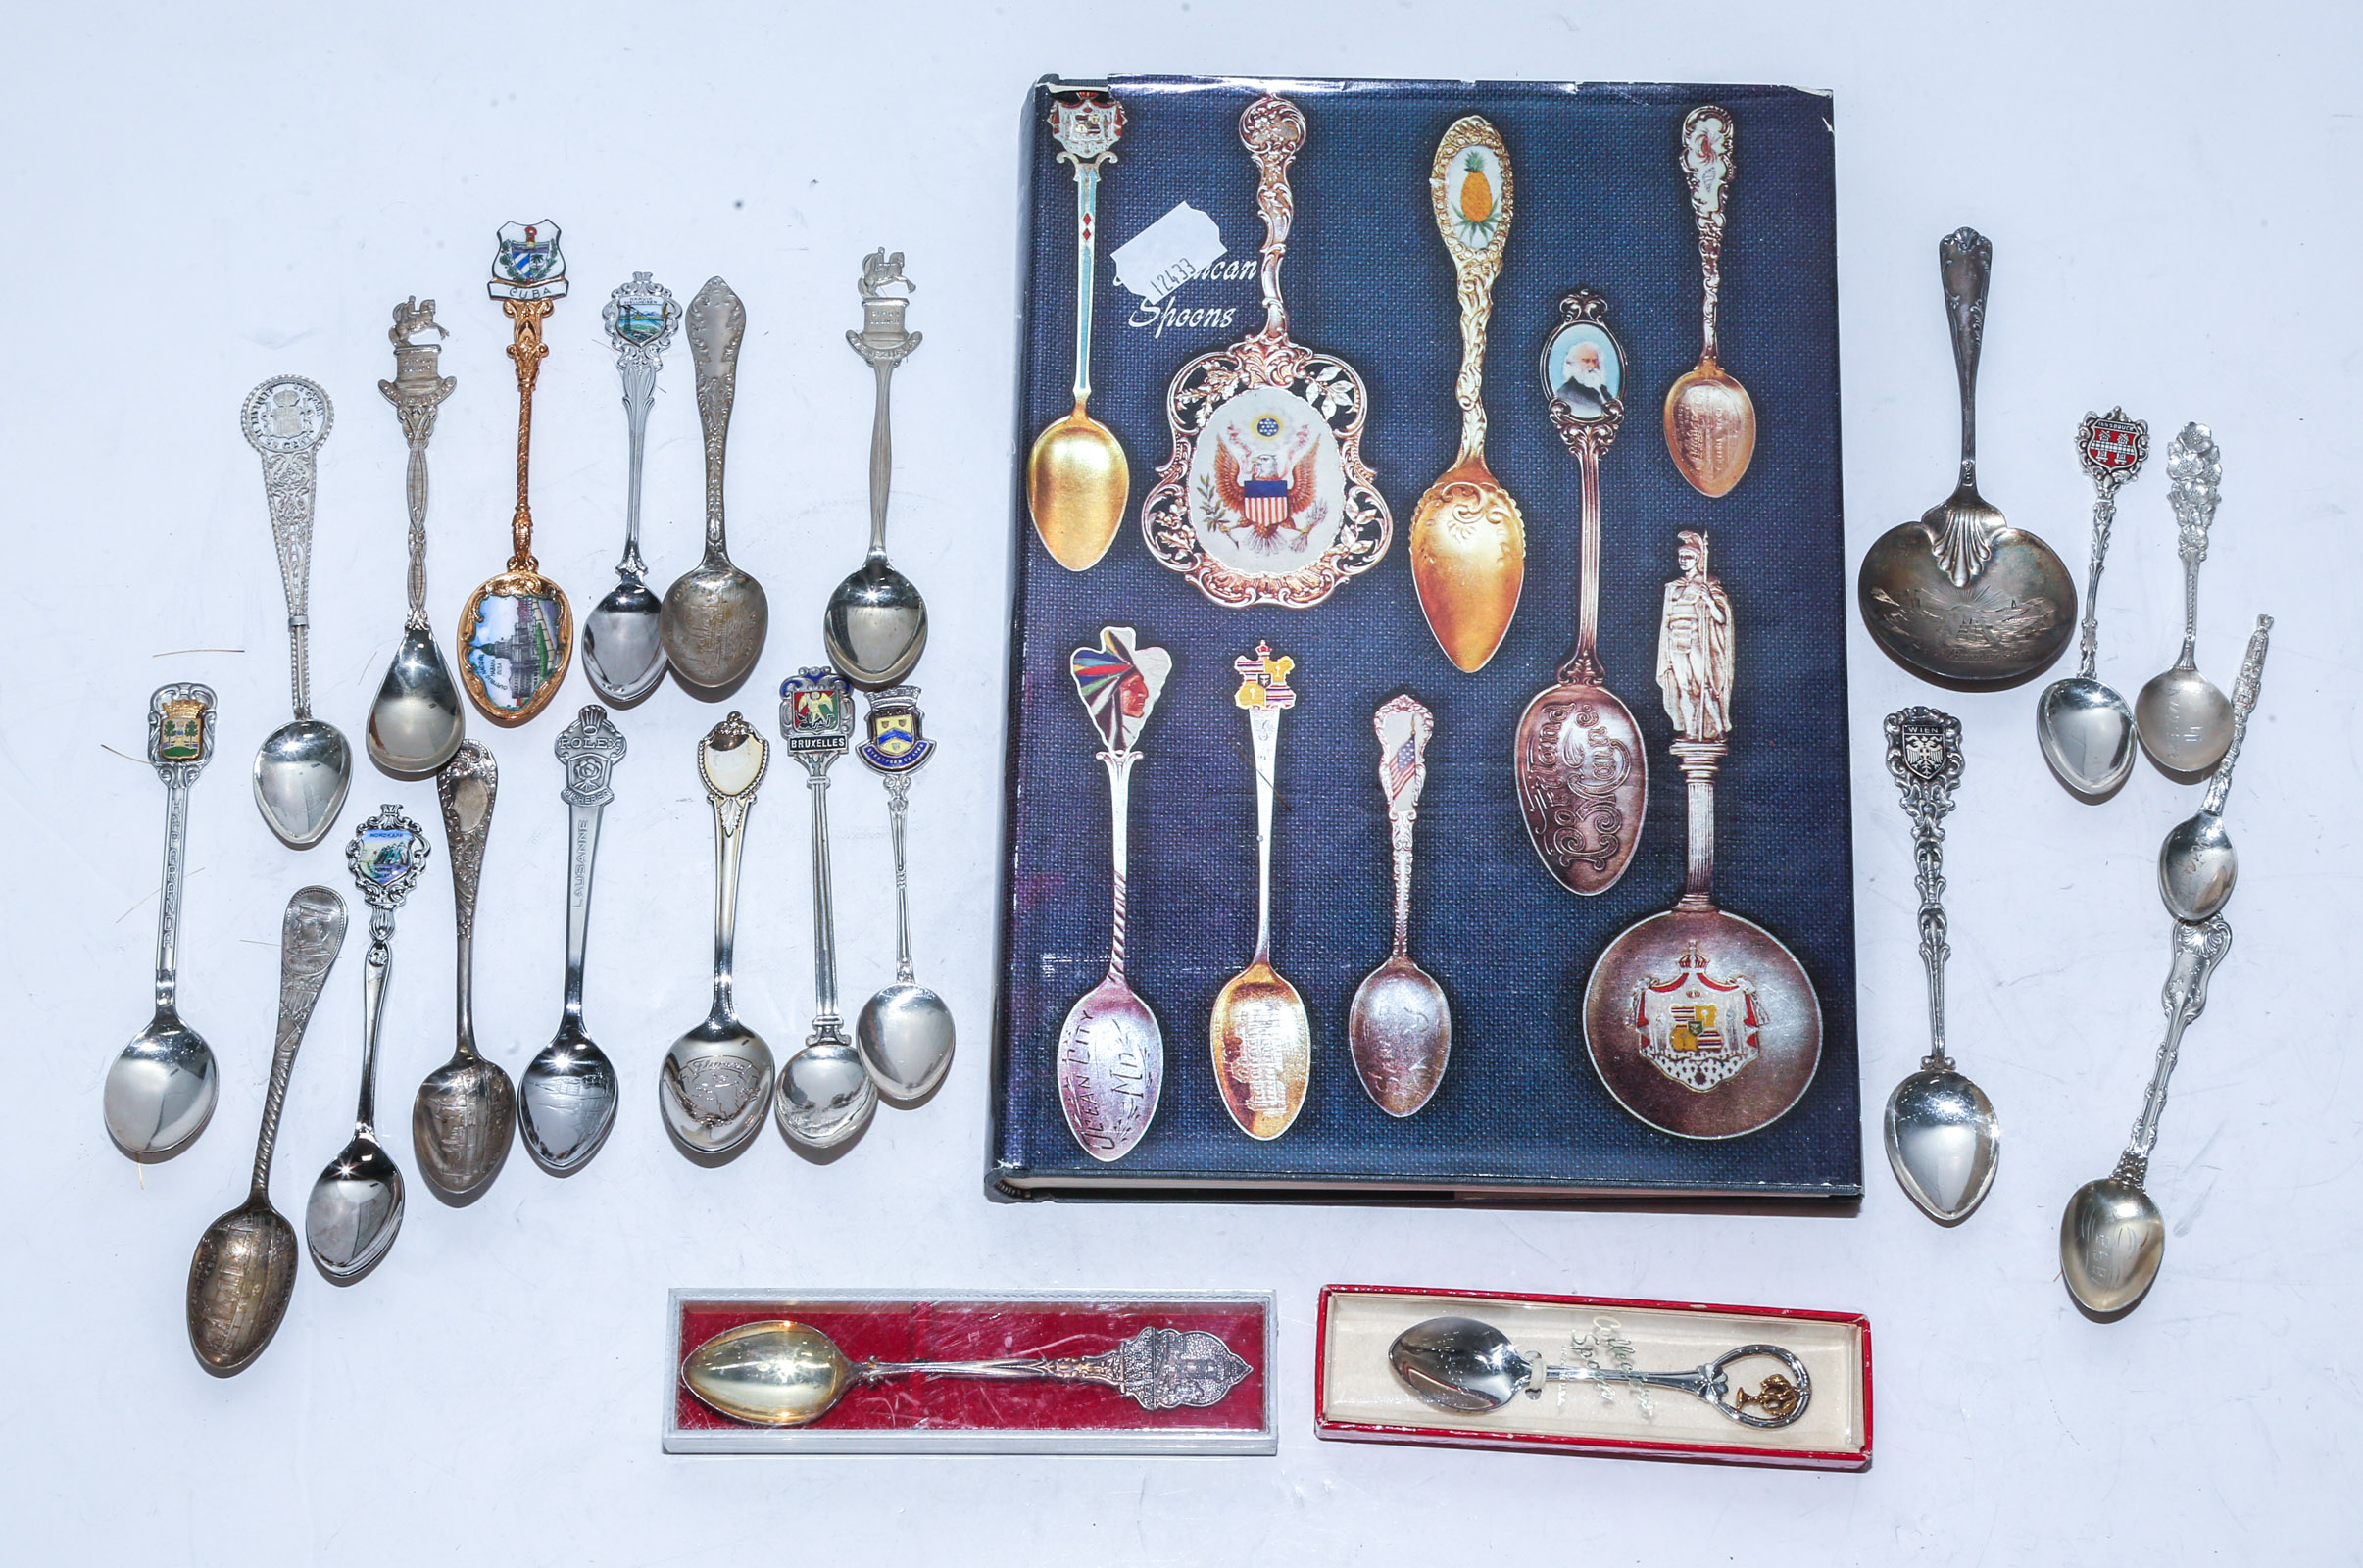 COLLECTION OF SOUVENIR SPOONS Including 3cb48f